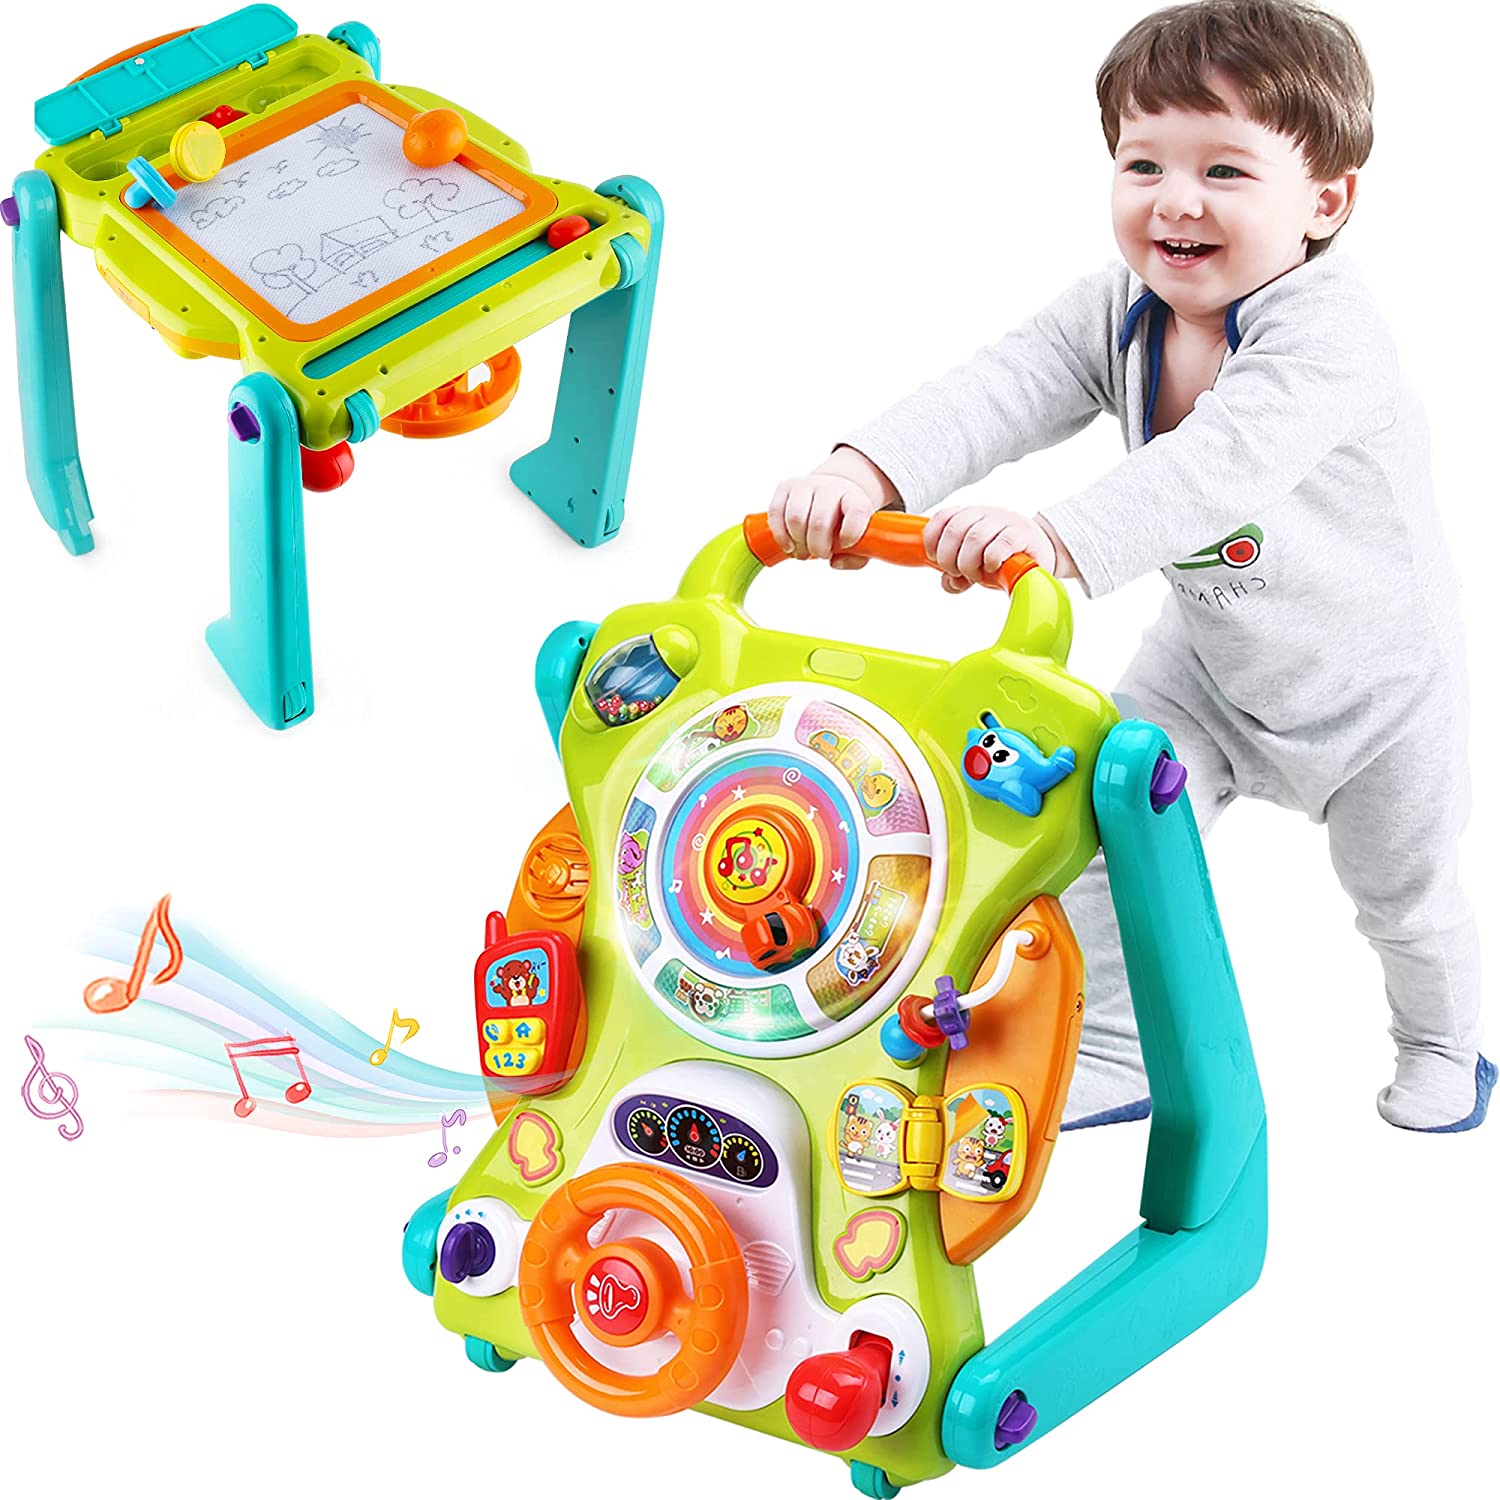 iPlay, iLearn Musical 3-In-1 Sit To Stand Toy